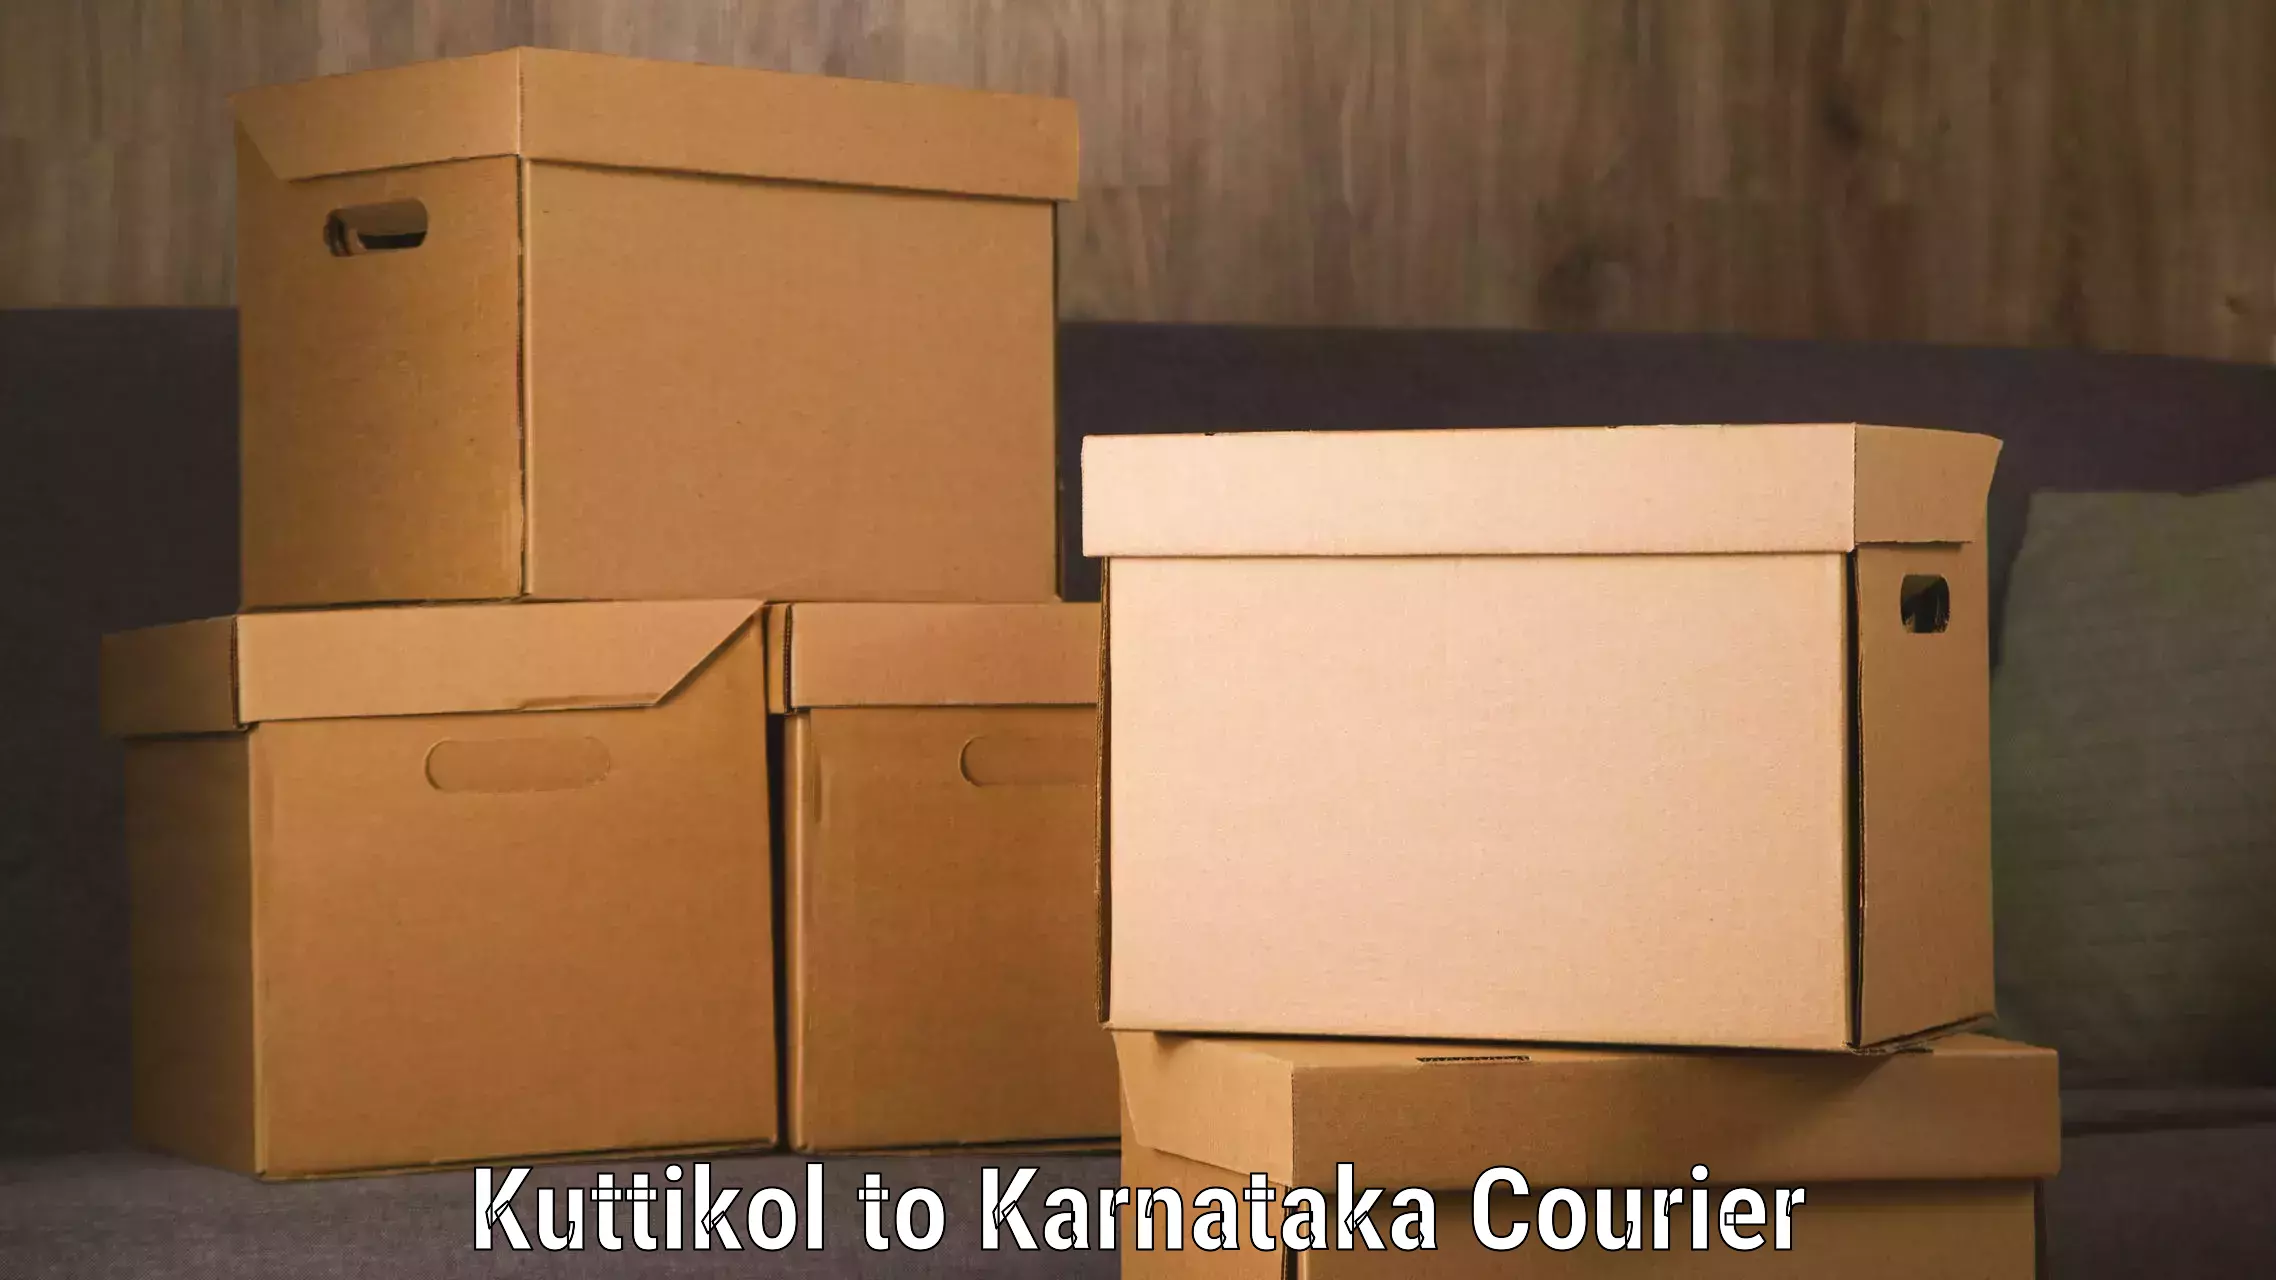 State-of-the-art courier technology Kuttikol to Yellare